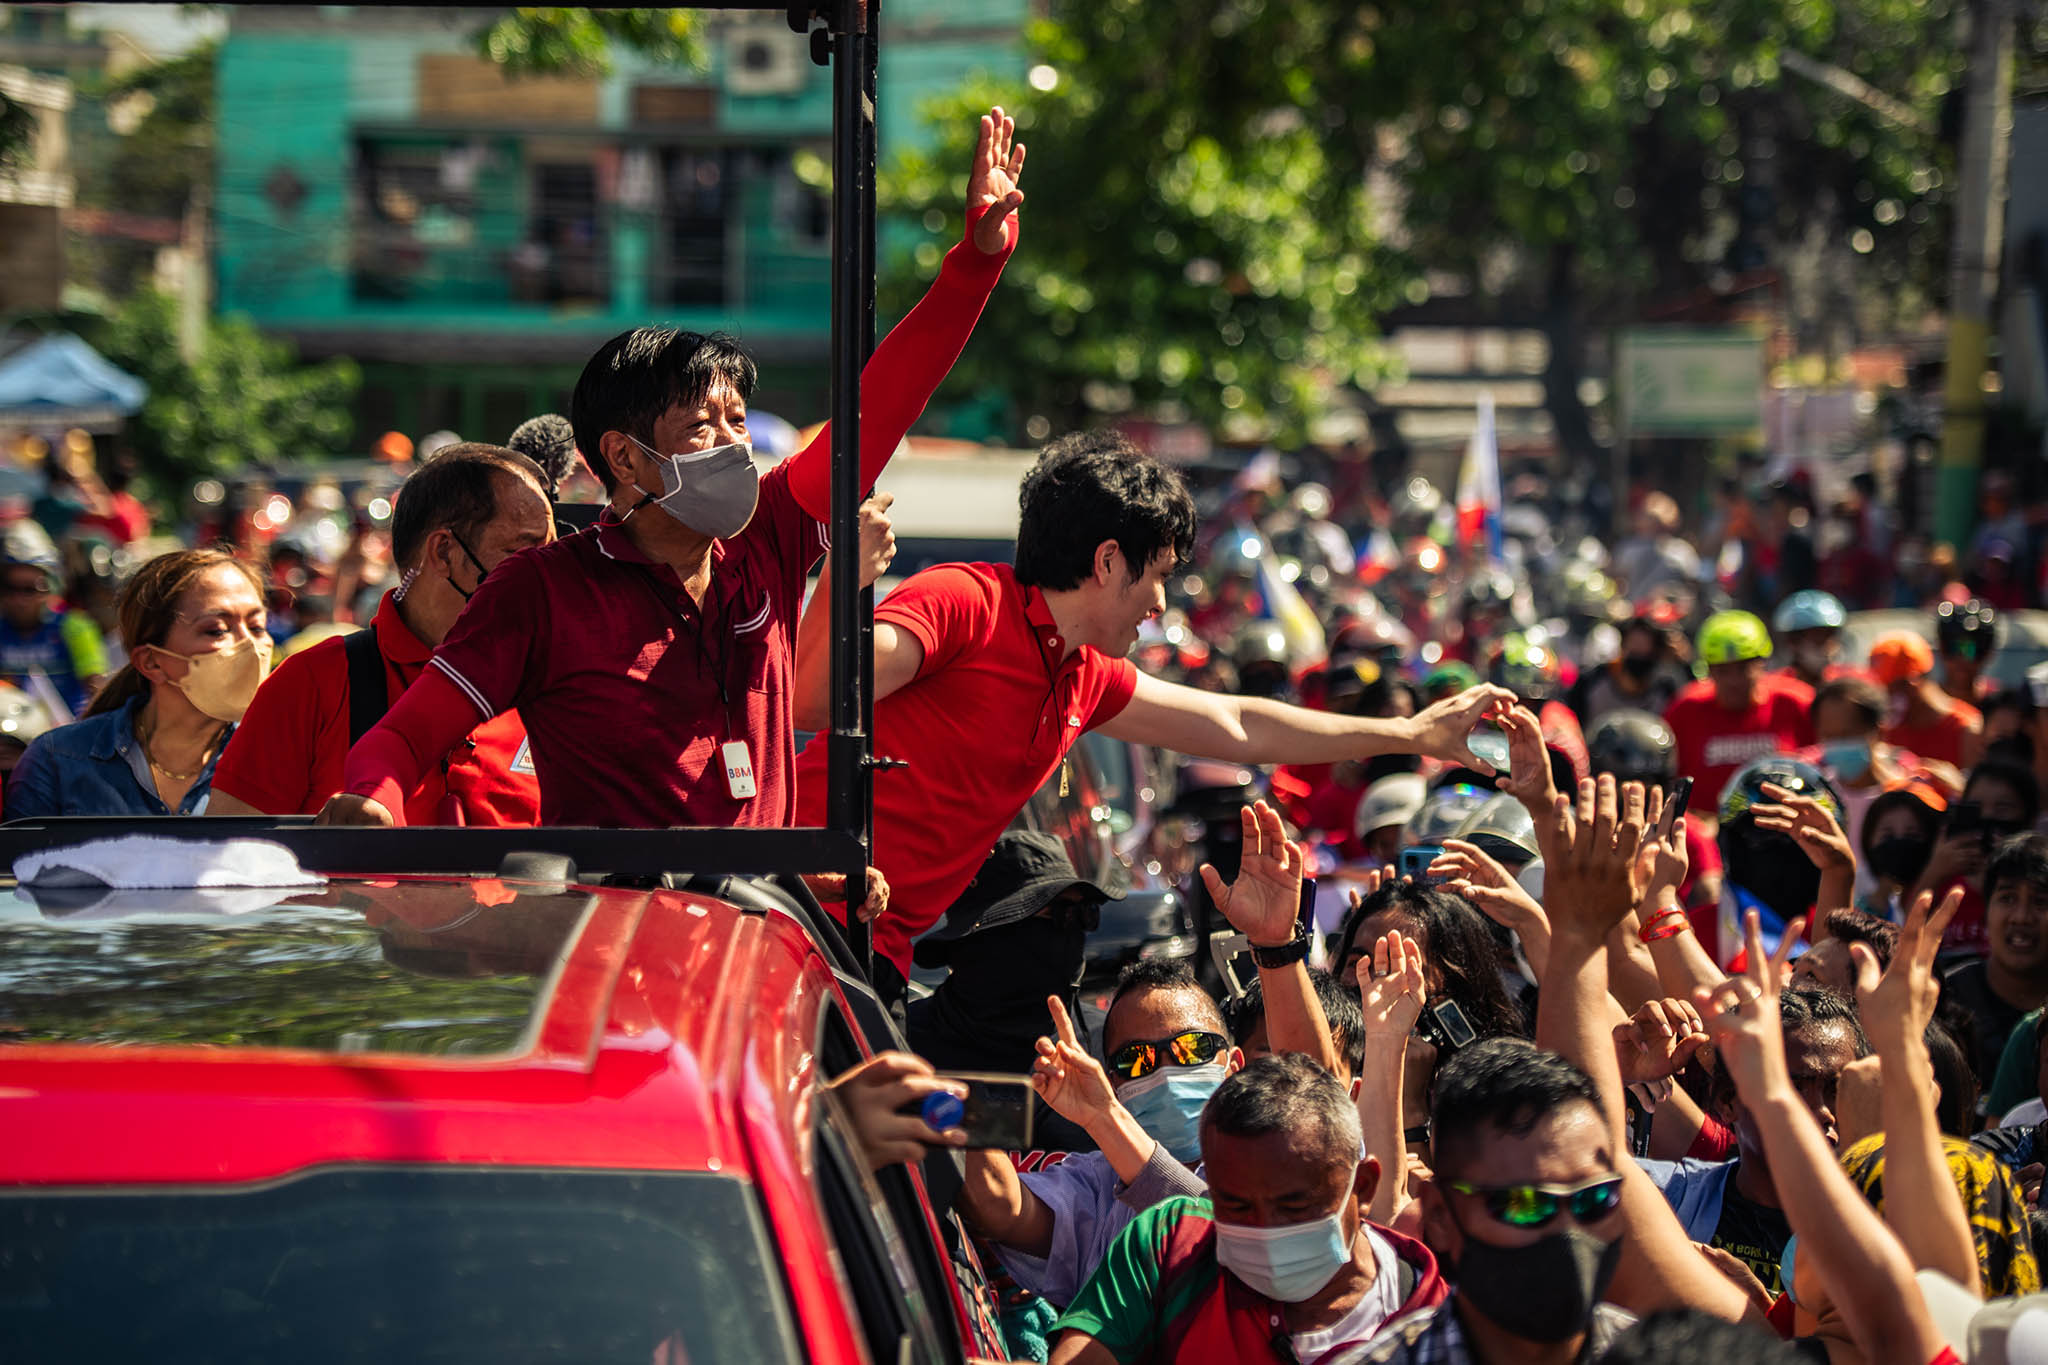 Ferdinand Marcos Jr. waves from a campaign motorcade, March 22, 2022. Since taking office, Marcos has reoriented Manilla’s foreign policy, tightening ties with Washington and pushing back on Beijing. (Jes Aznar/The New York Times)